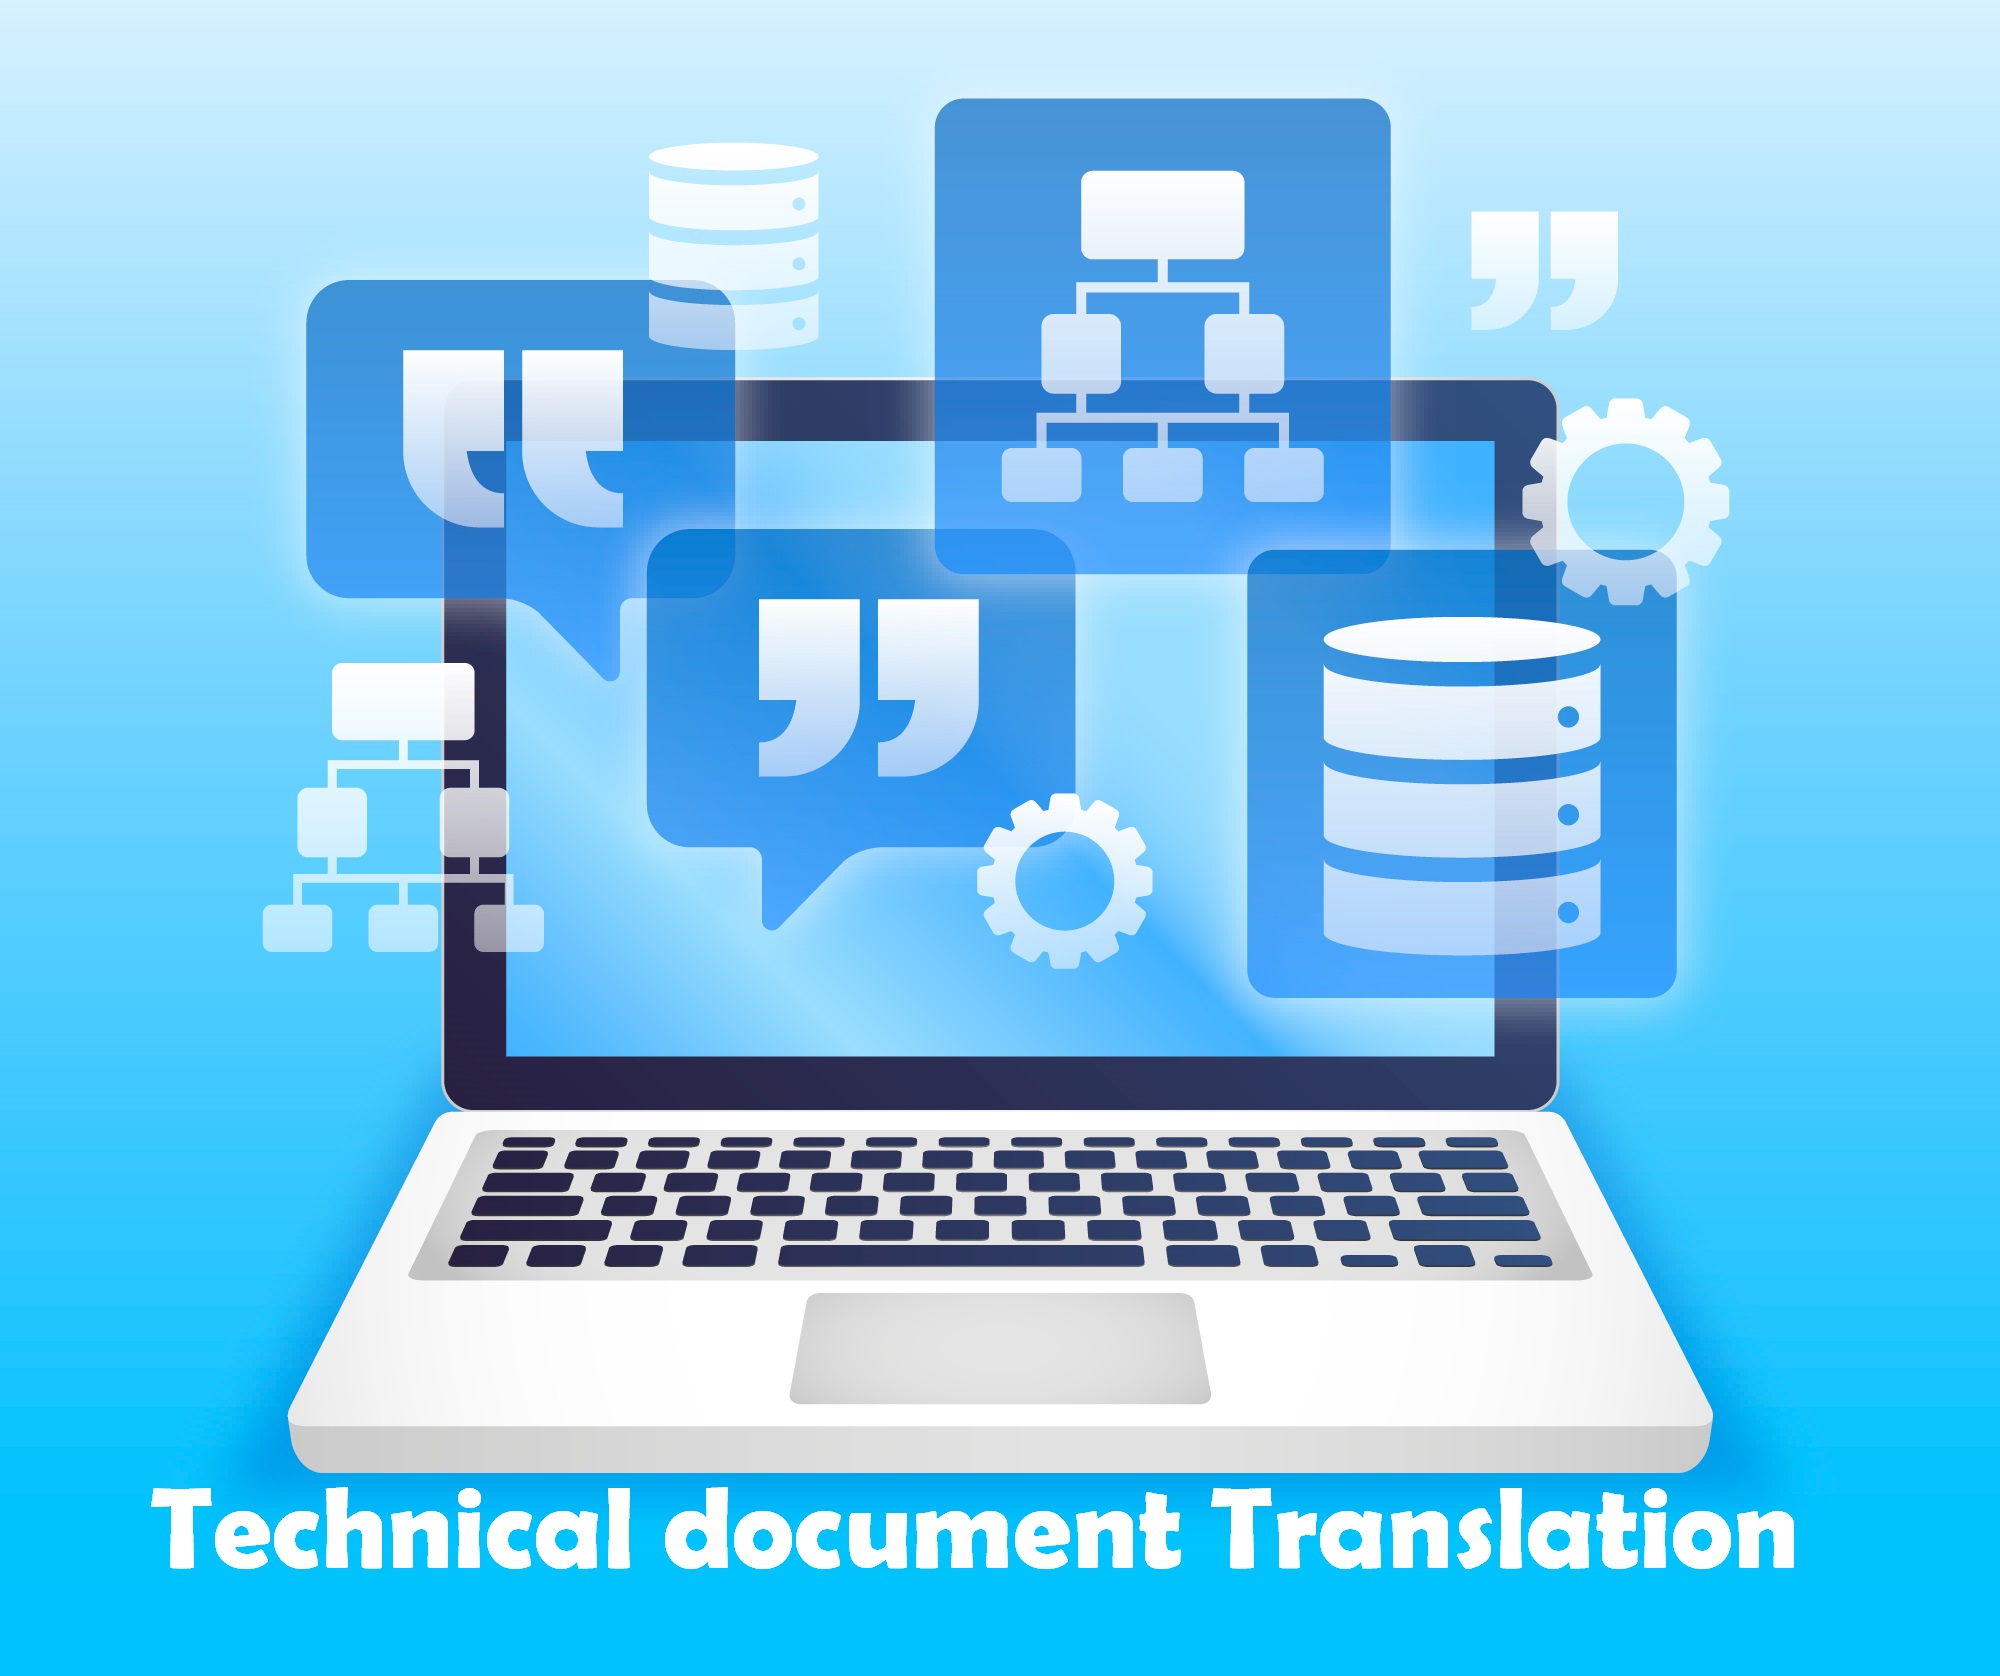 Technical document translation with utmost precision